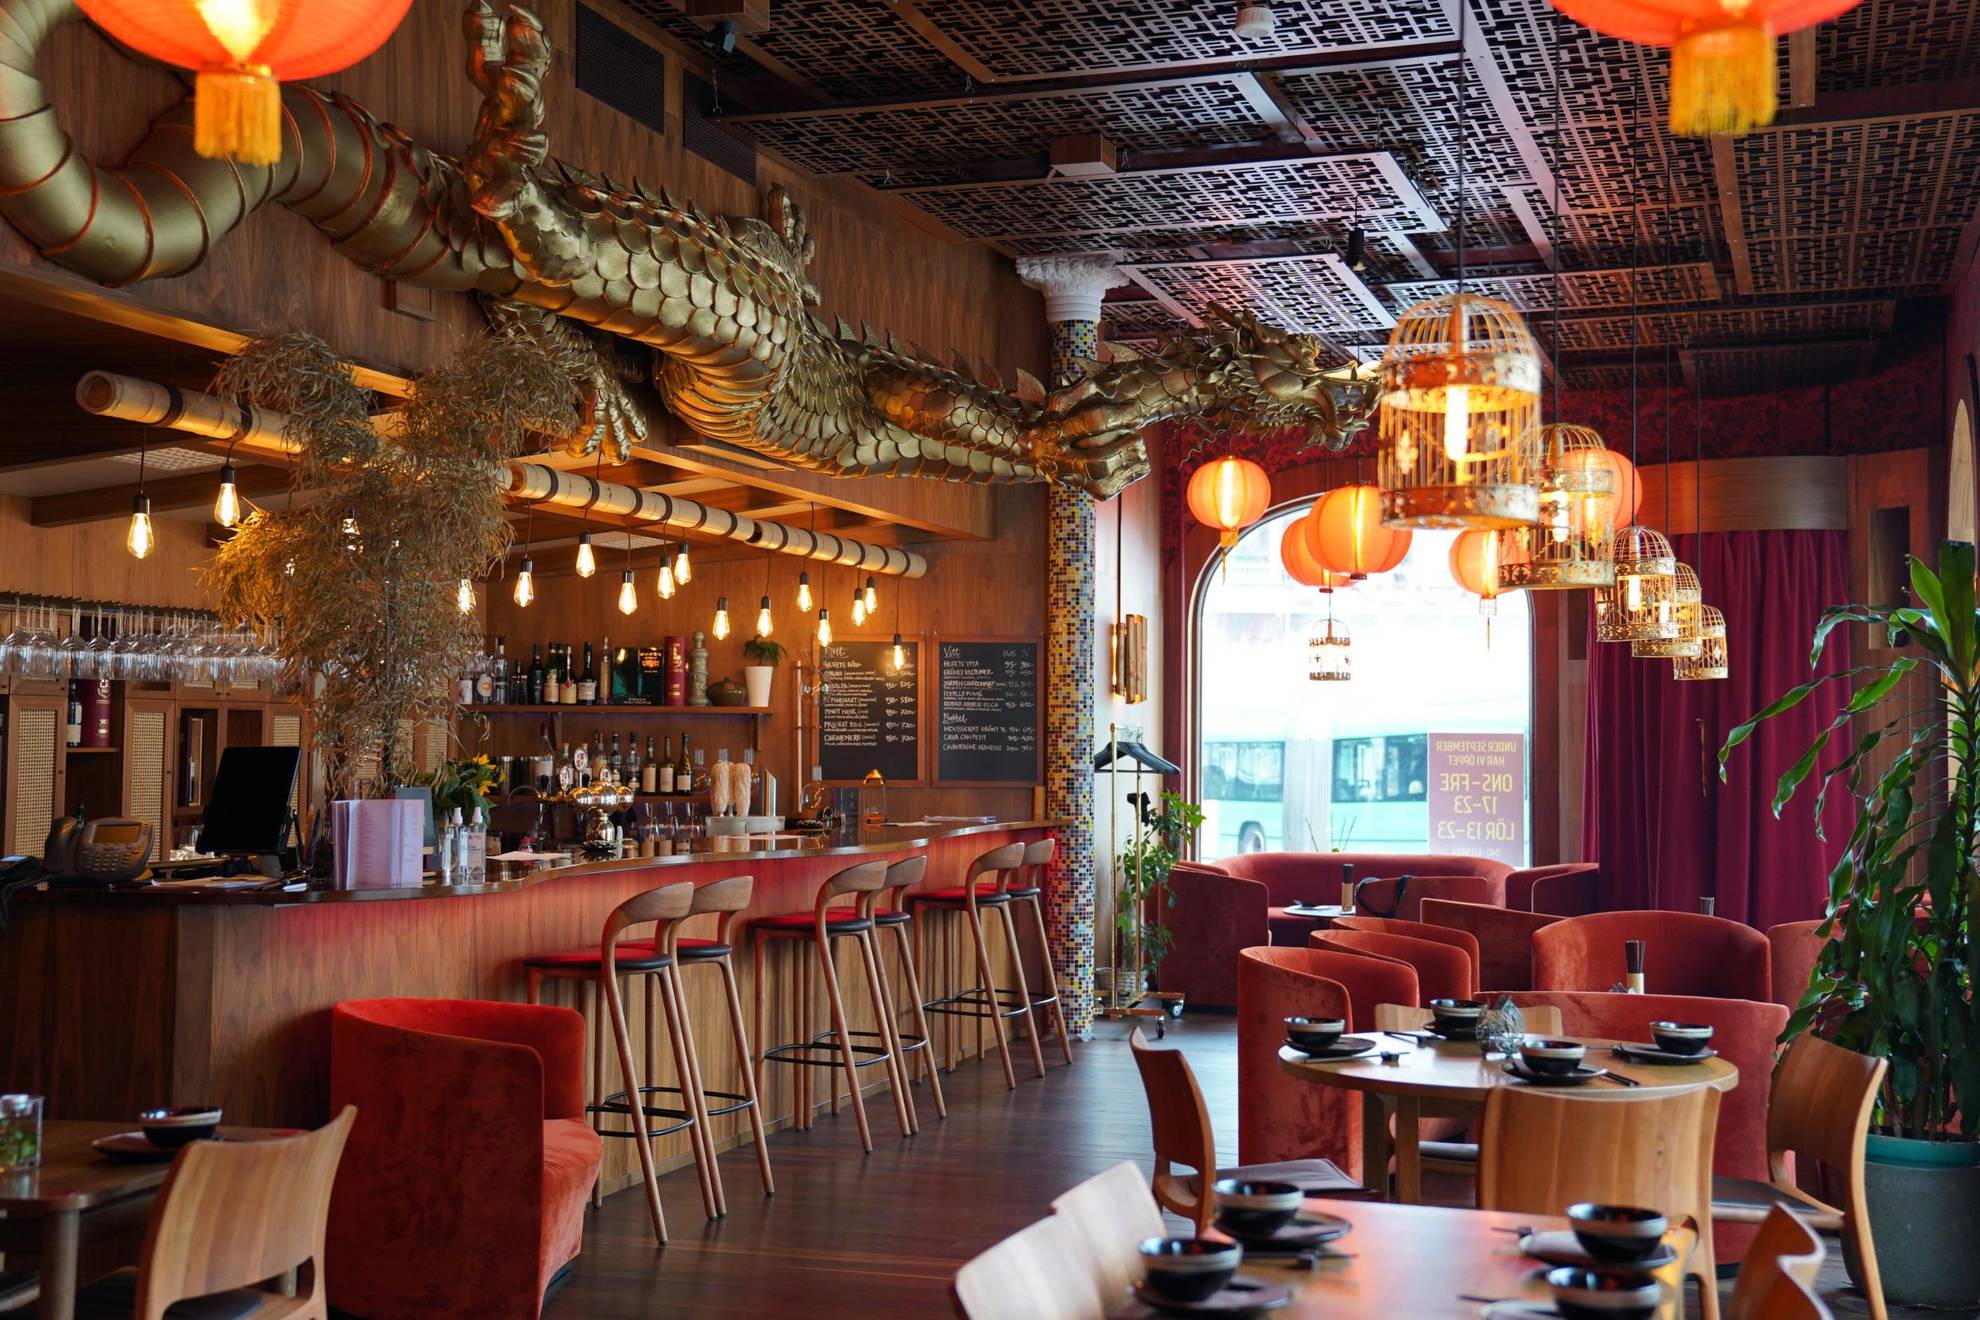 Inside a Chinese restaurant. To the left a bar with six bar stools. A large golden dragon is placed above the bar. To the right tables and chairs. The tables are set with plates, small bowls and chop sticks. Orange lamps are hanging from the ceiling.